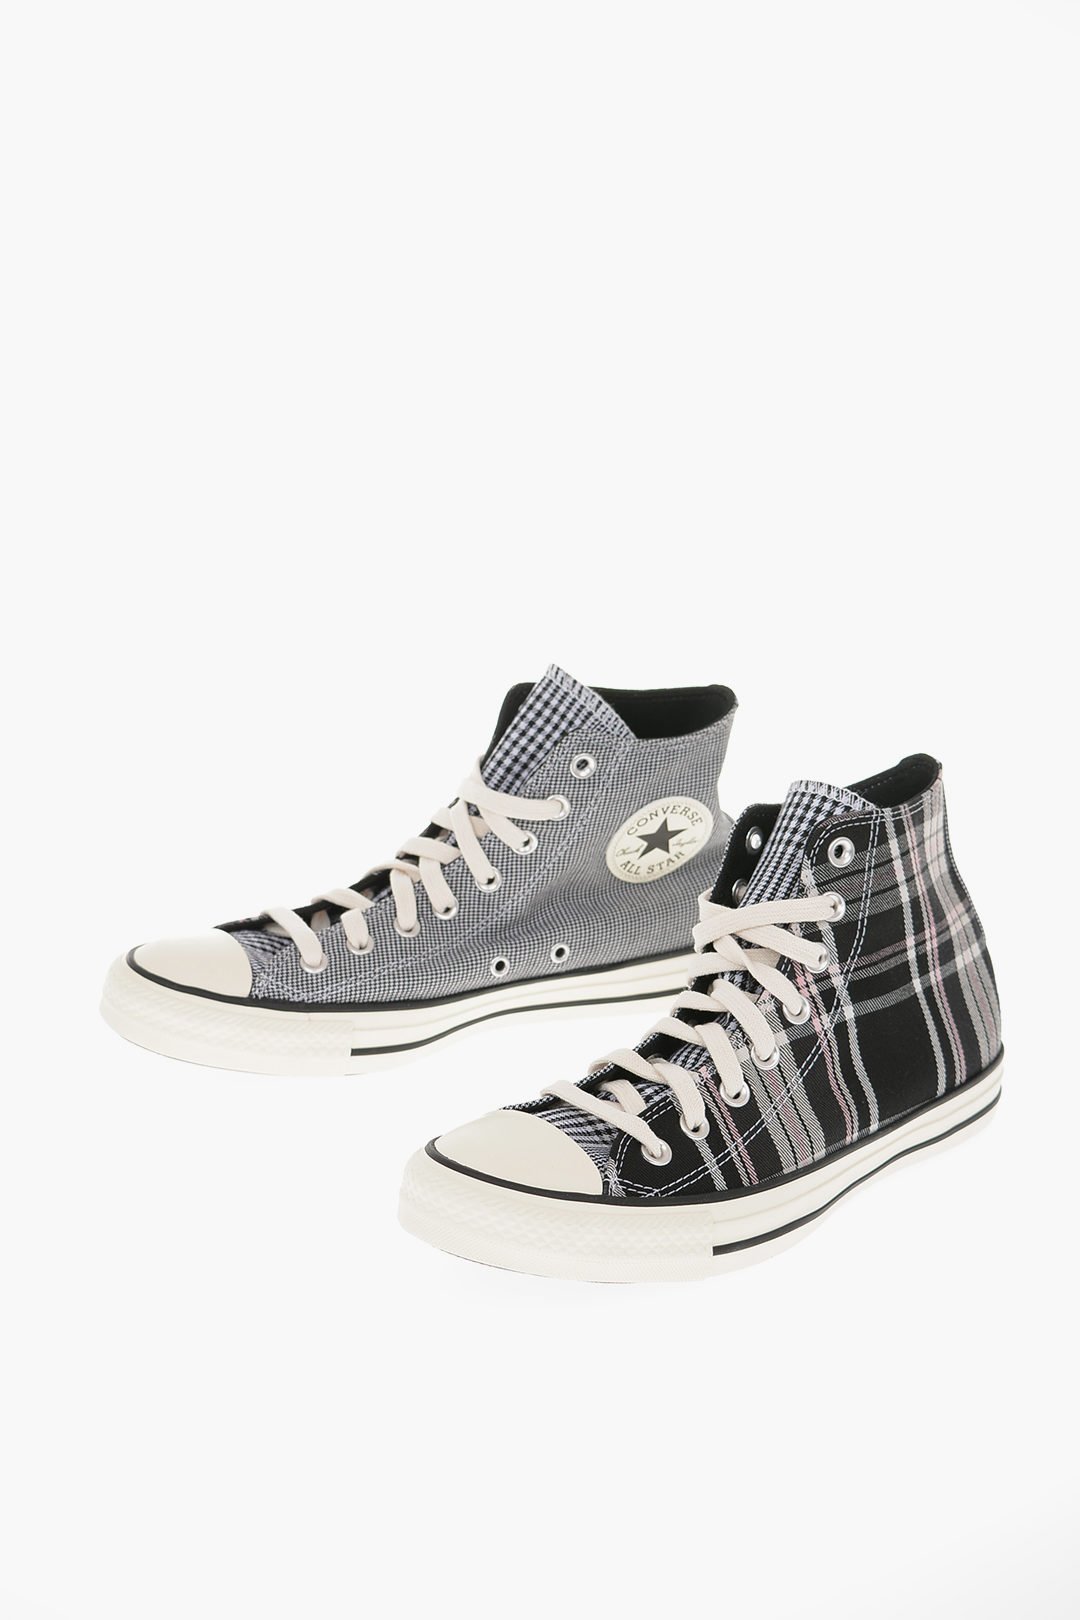 Slibende atlet tælle Converse CHUCK TAYLOR ALL STAR Houndstooth and Tartan Check High-top  Sneakers women - Glamood Outlet